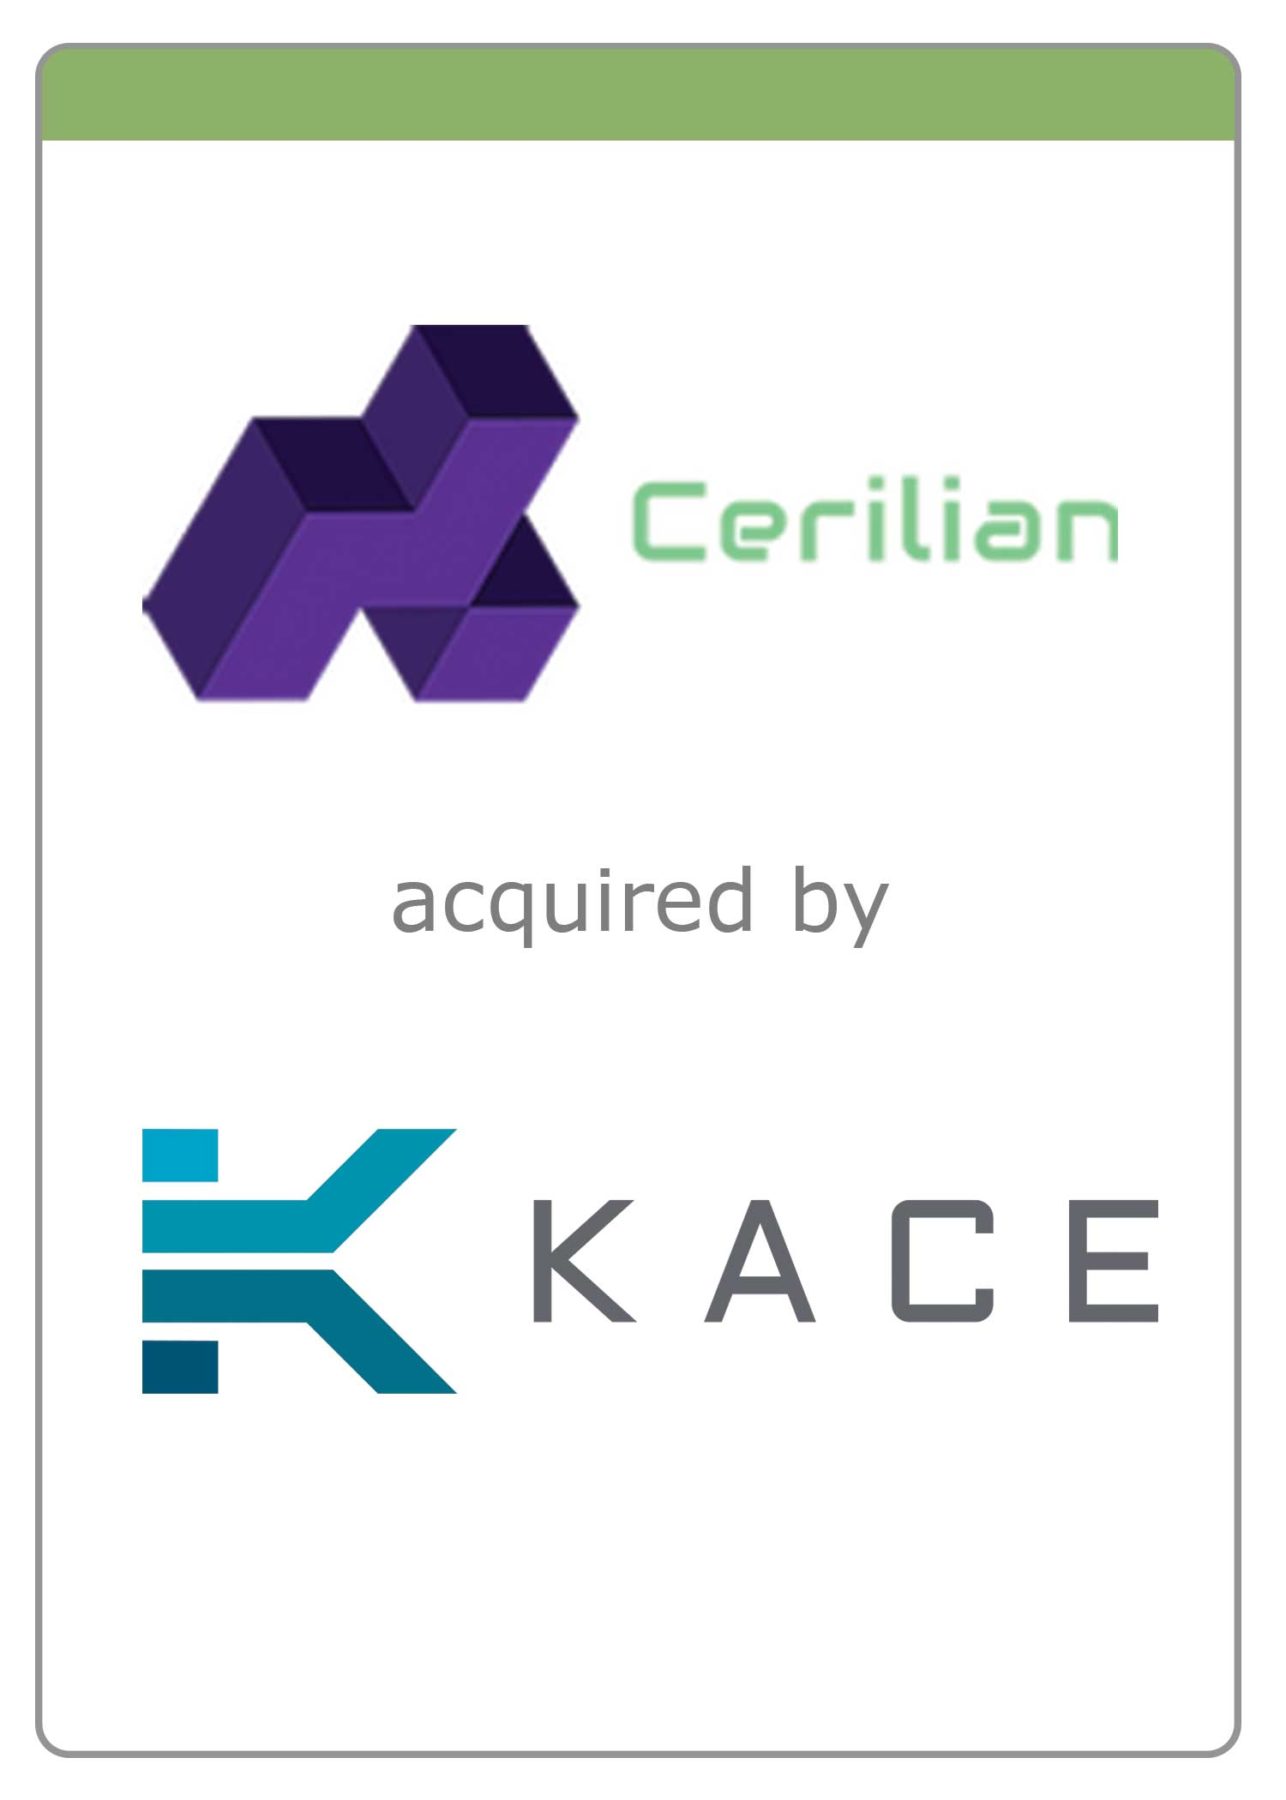 CERILIAN acquired by KACE Expands Kaces’s footprint in the National Security Market